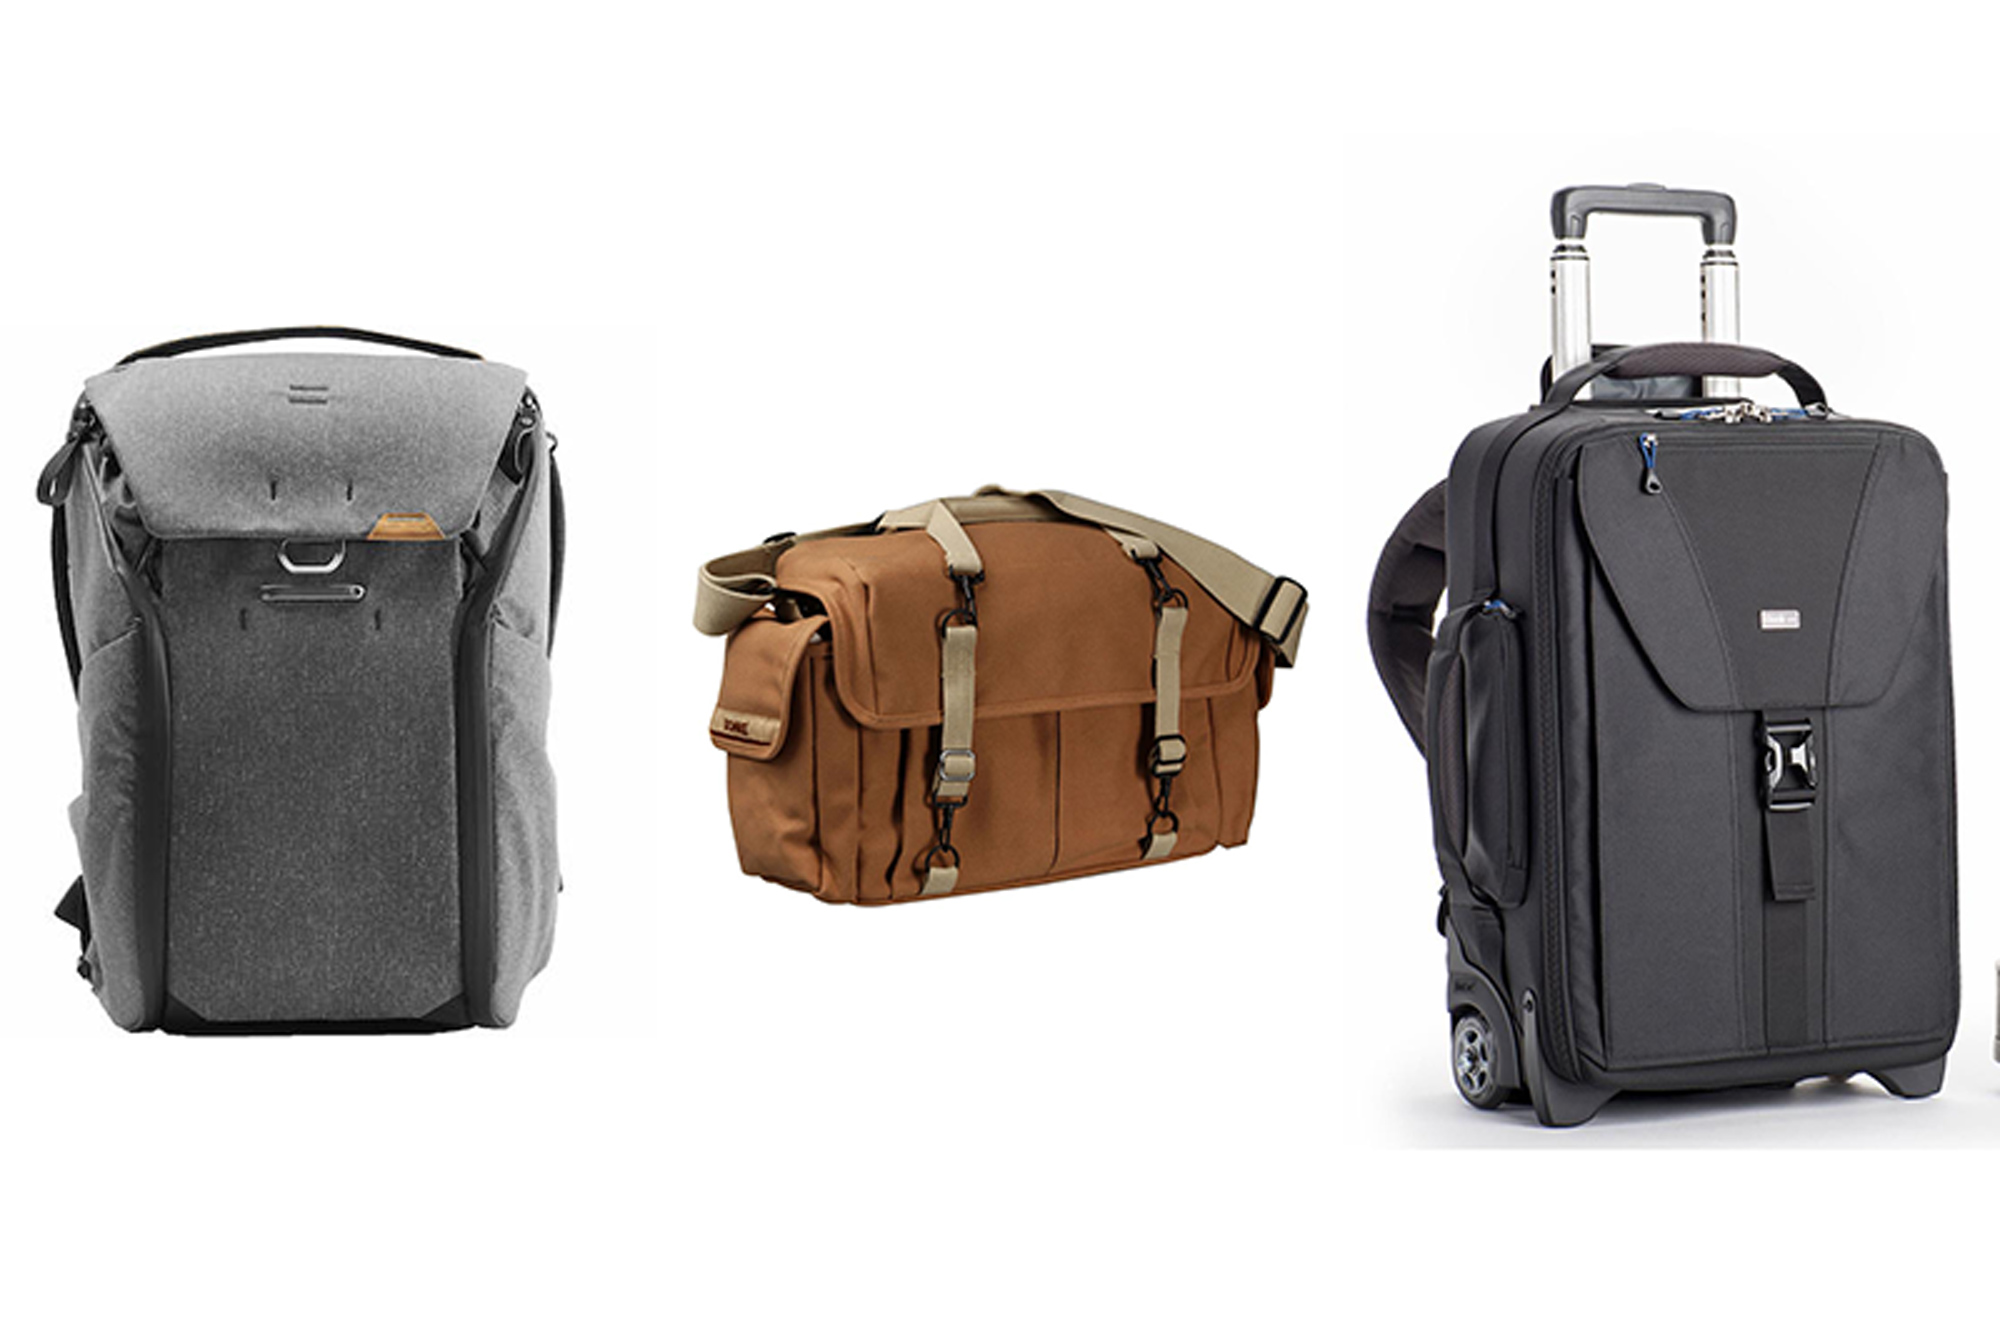 The Best Camera Bags in 2019 According to SLR Lounge [Updated]